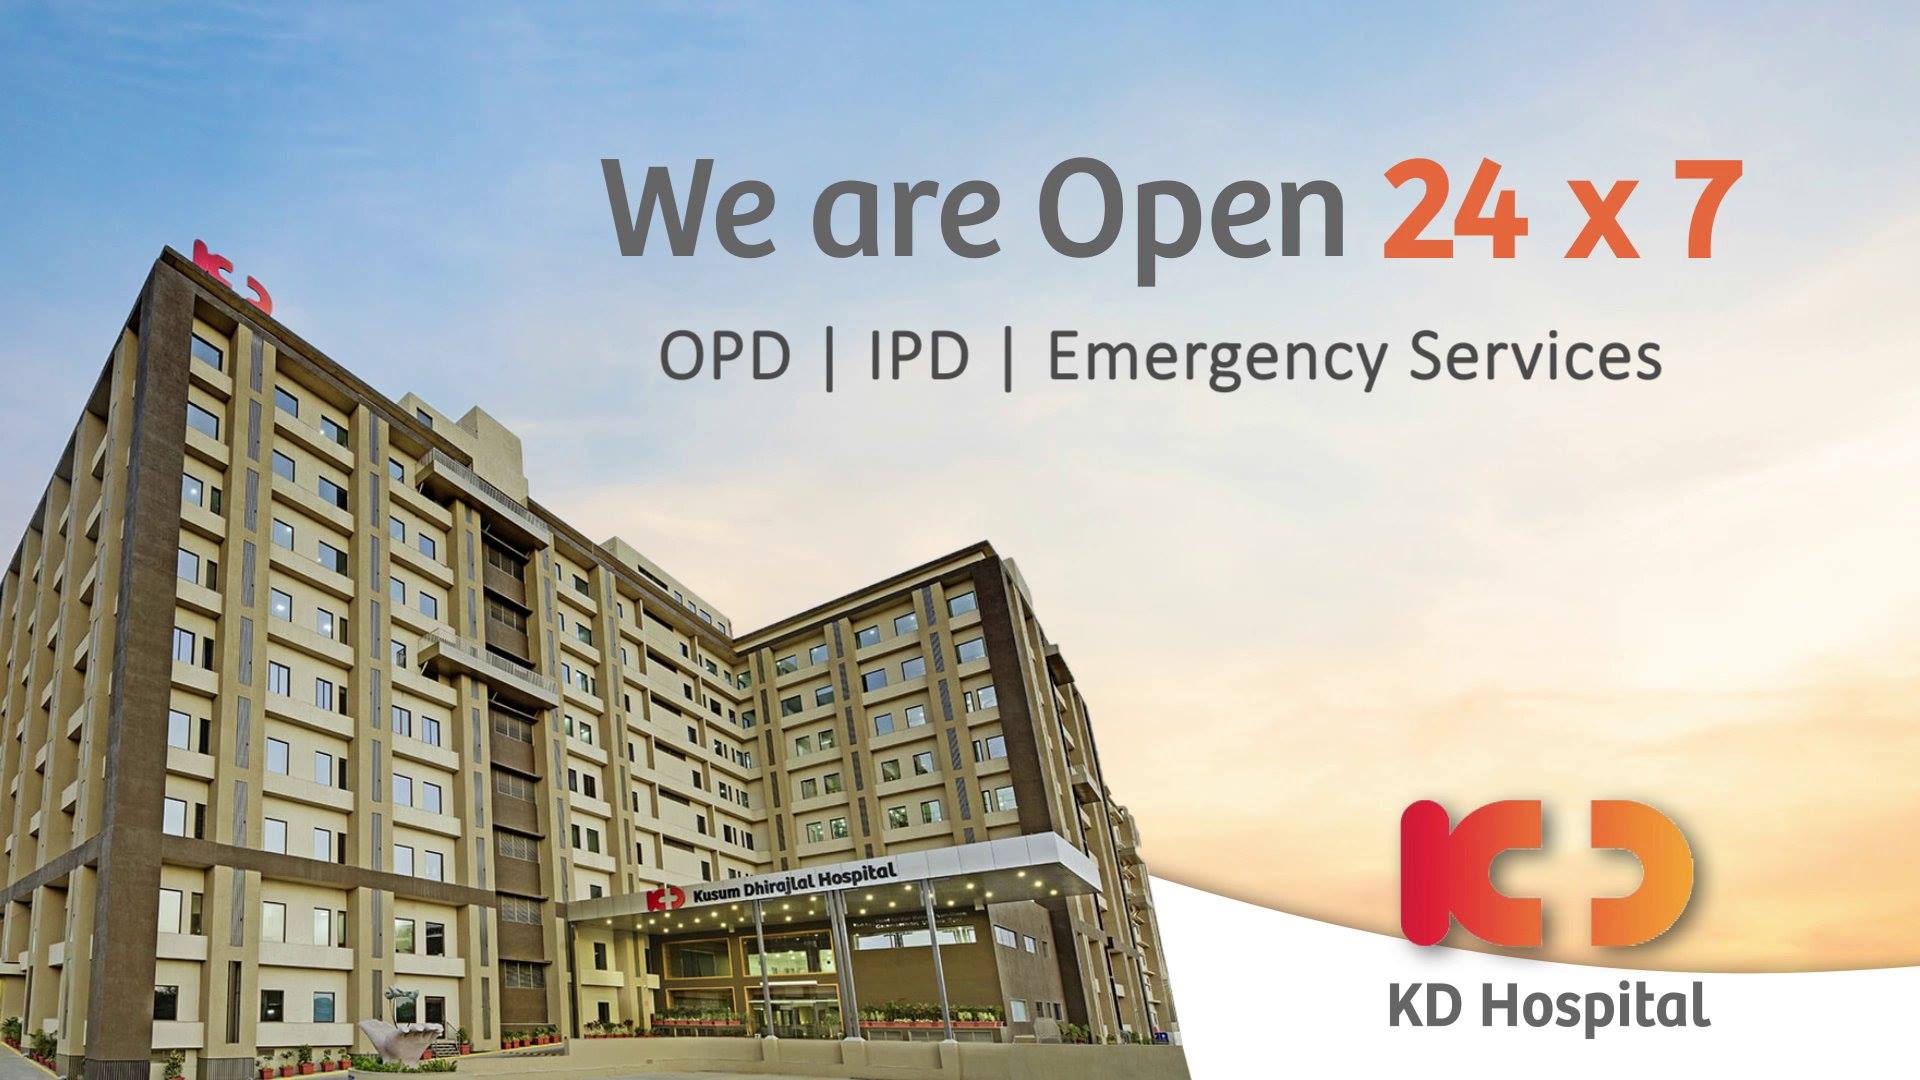 During these testing times, KD Hospital assures you that we are there for you and always a step ahead to take precautions while providing you safe healthcare services.

Our OPD, IPD & Emergency Services are fully operational with an option of Tele-Medicine available as well. We remain committed towards providing best patient care at an affordable rate.

Call us on 07966770000 to book an appointment and consult our expert Doctors now!

#CoronaVirus #CoronaAlert #StayAware #StaySafe #pandemic #caronavirusoutbreak #Quarantined #QuarantineAndChill #coronapocalypse #KDHospital #goodhealth #health #wellness #fitness #healthiswealth #healthyliving #patientscare #Ahmedabad #Gujarat #India